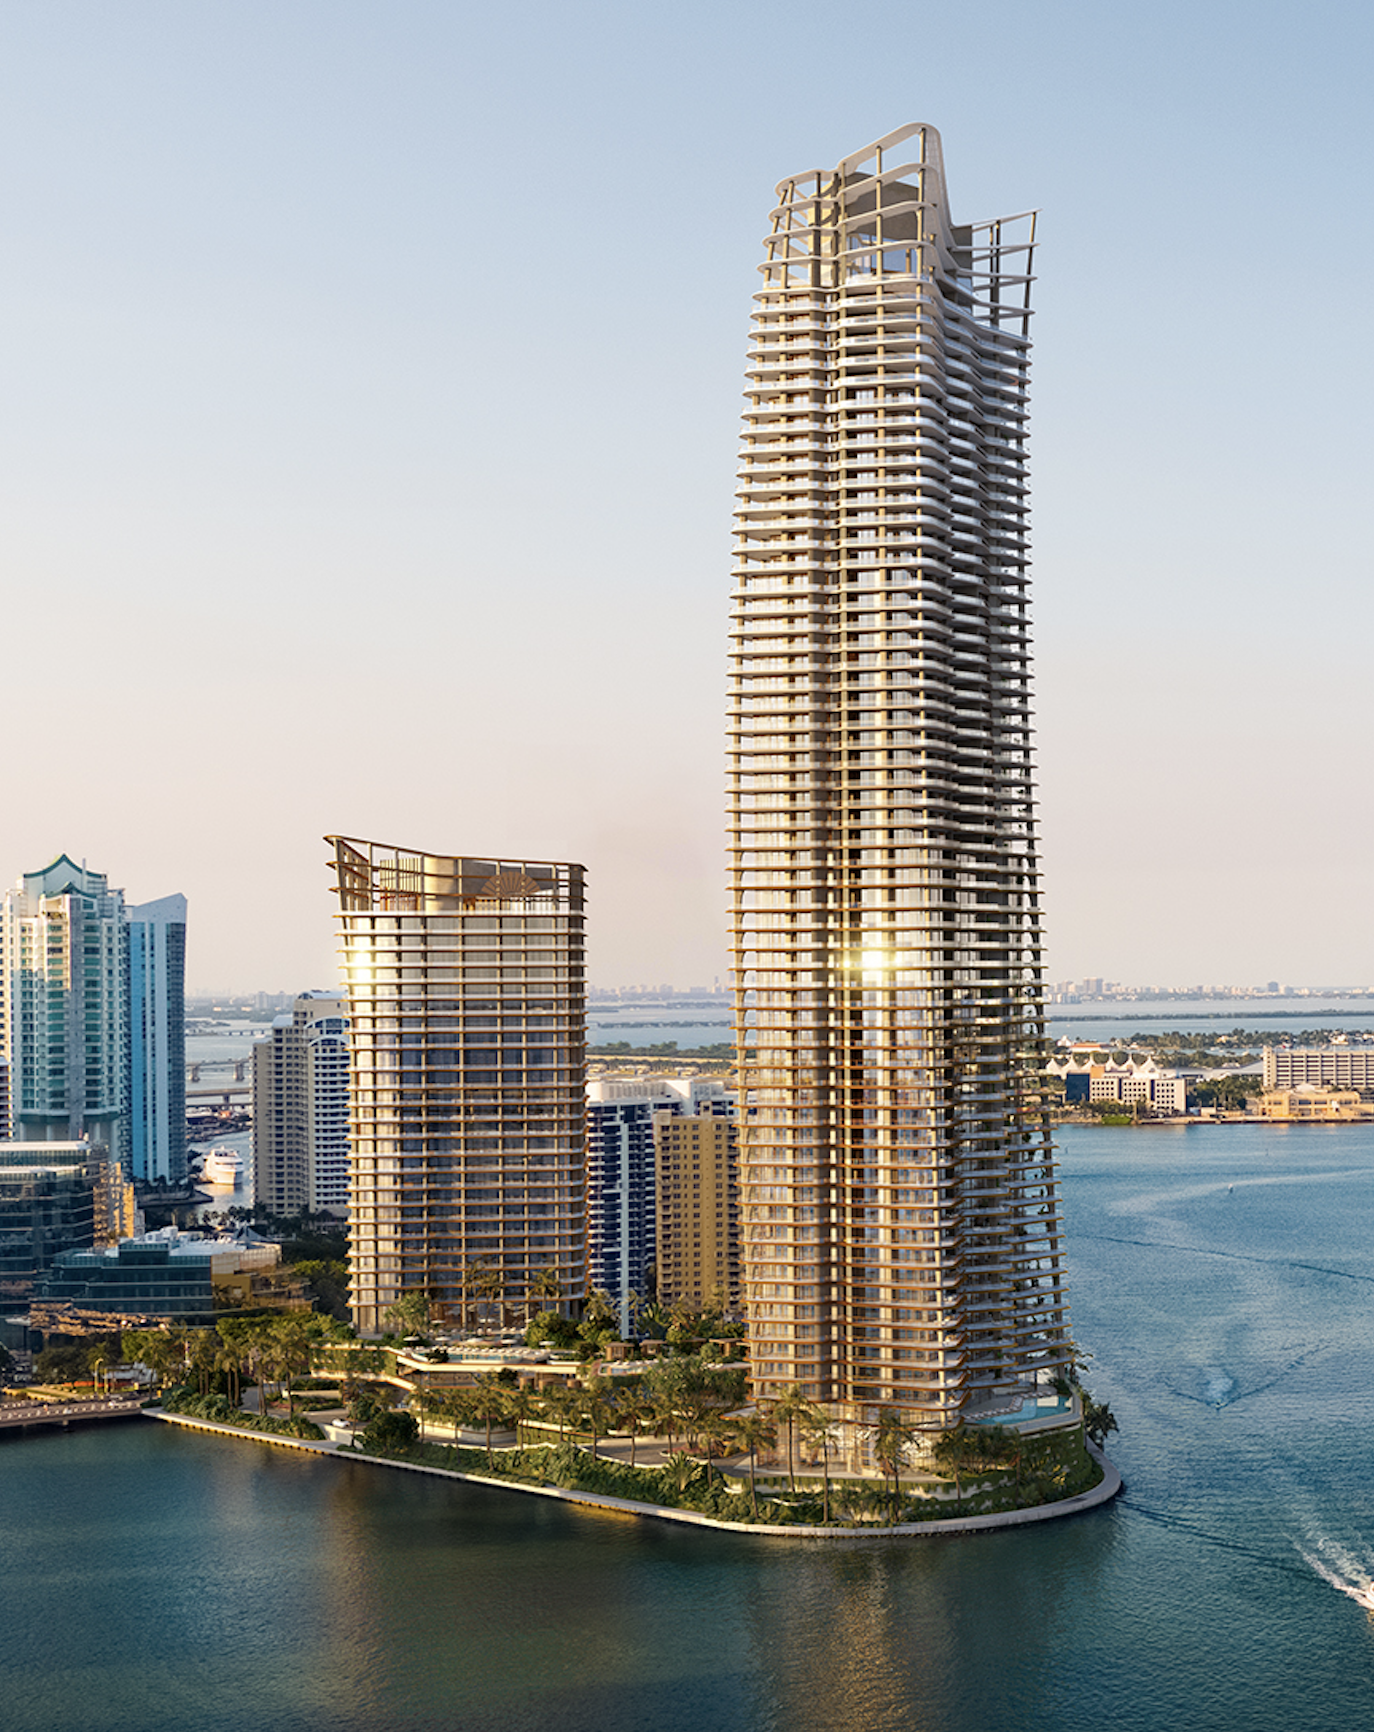 ‘One Island Drive’ With Two Towers Designed By Kohn Pedersen Fox, Set To Soar Over 800 Feet On Brickell Key